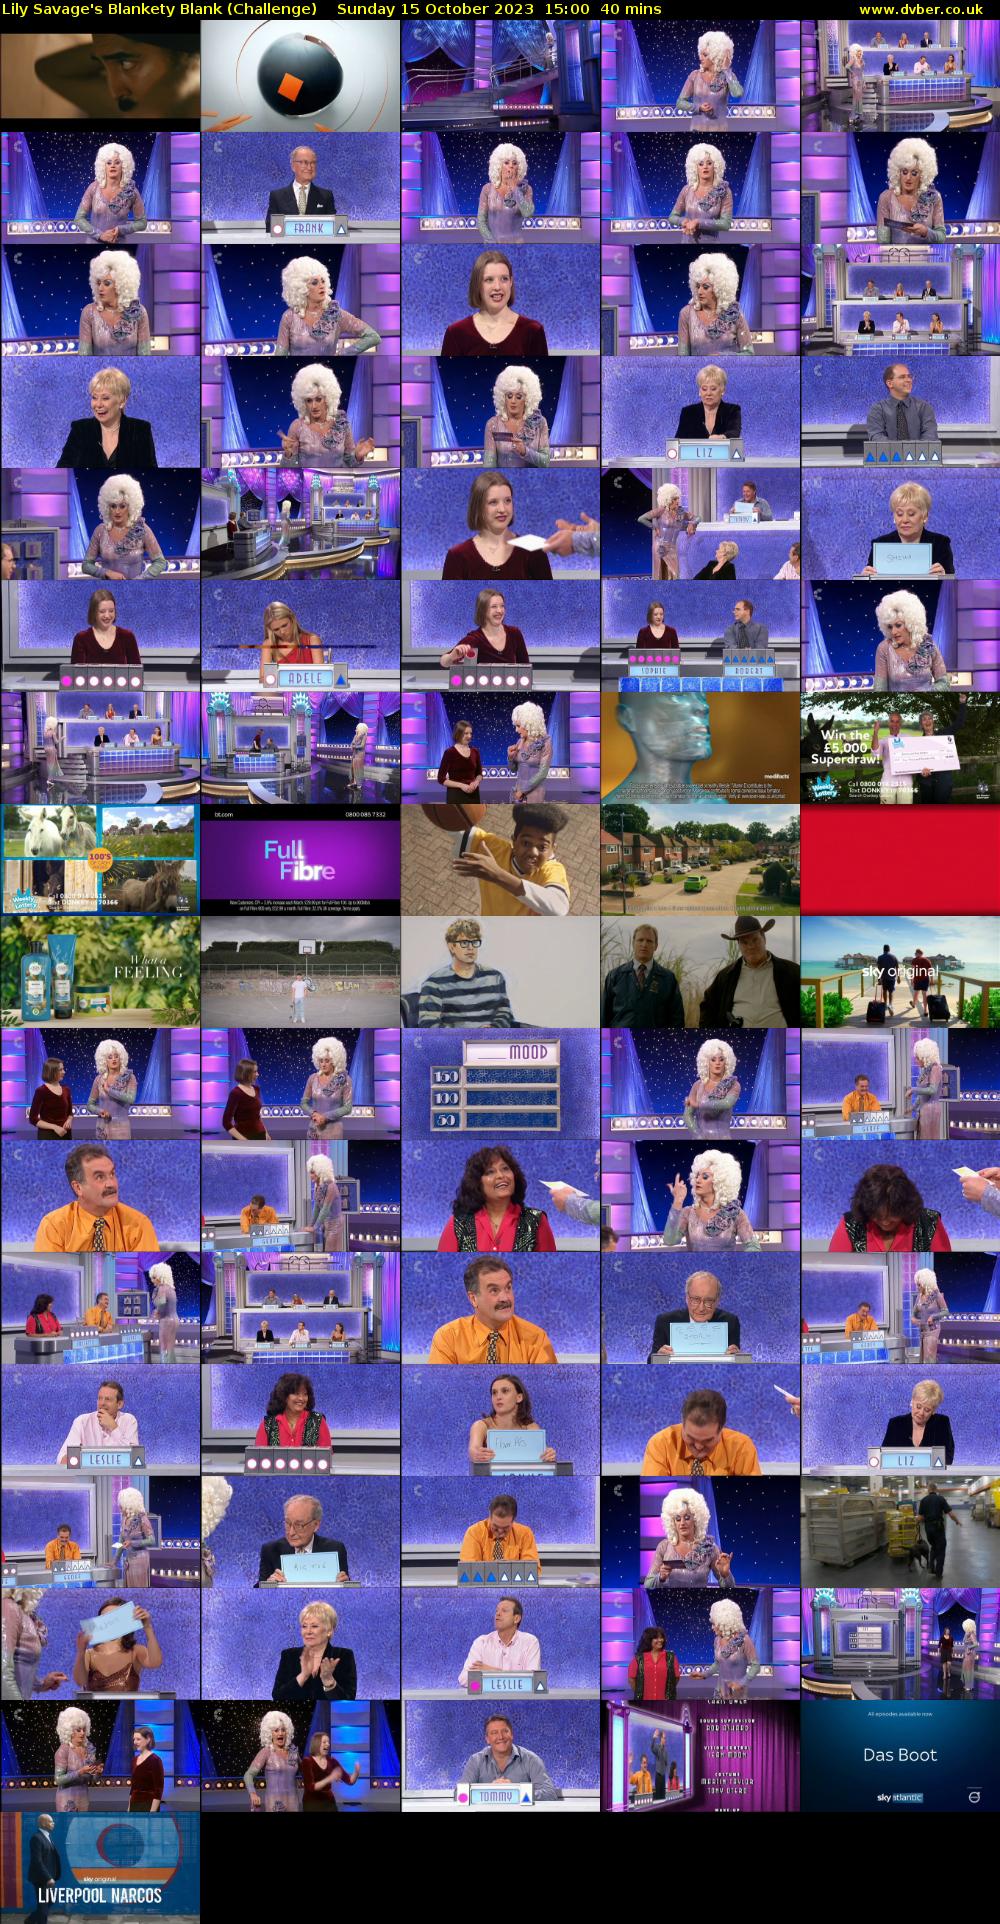 Lily Savage's Blankety Blank (Challenge) Sunday 15 October 2023 15:00 - 15:40